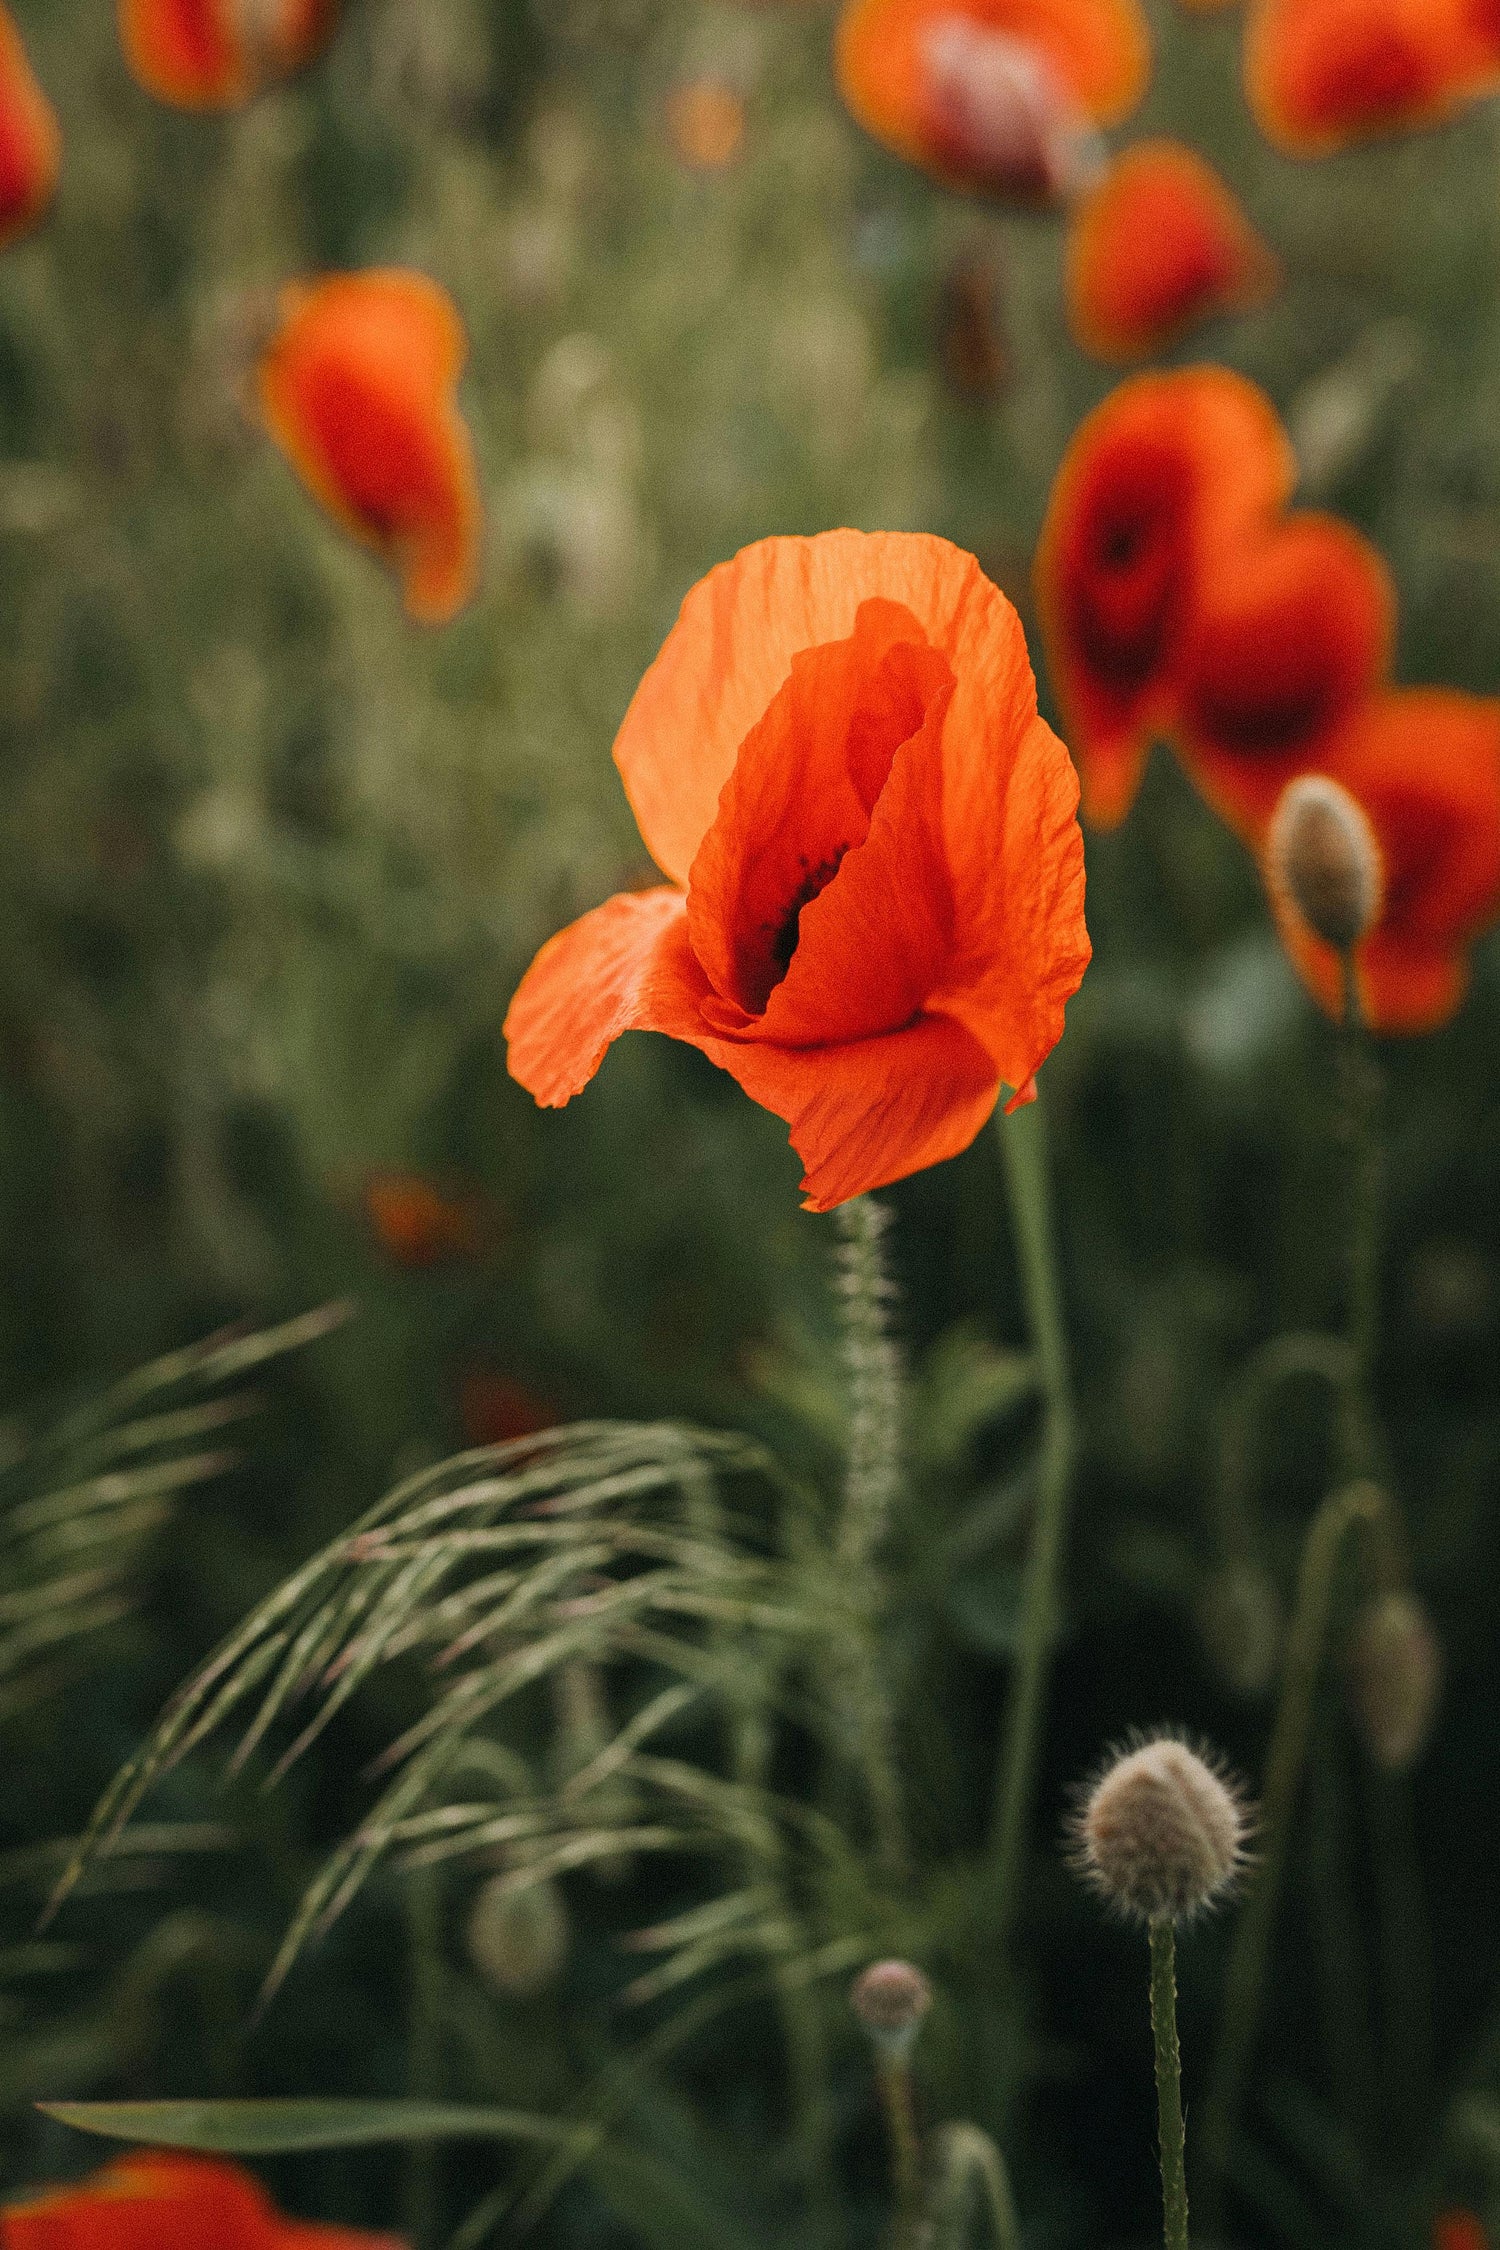 A vivid orange poppy in focus, standing out against a soft background of green grass and blurred poppies.